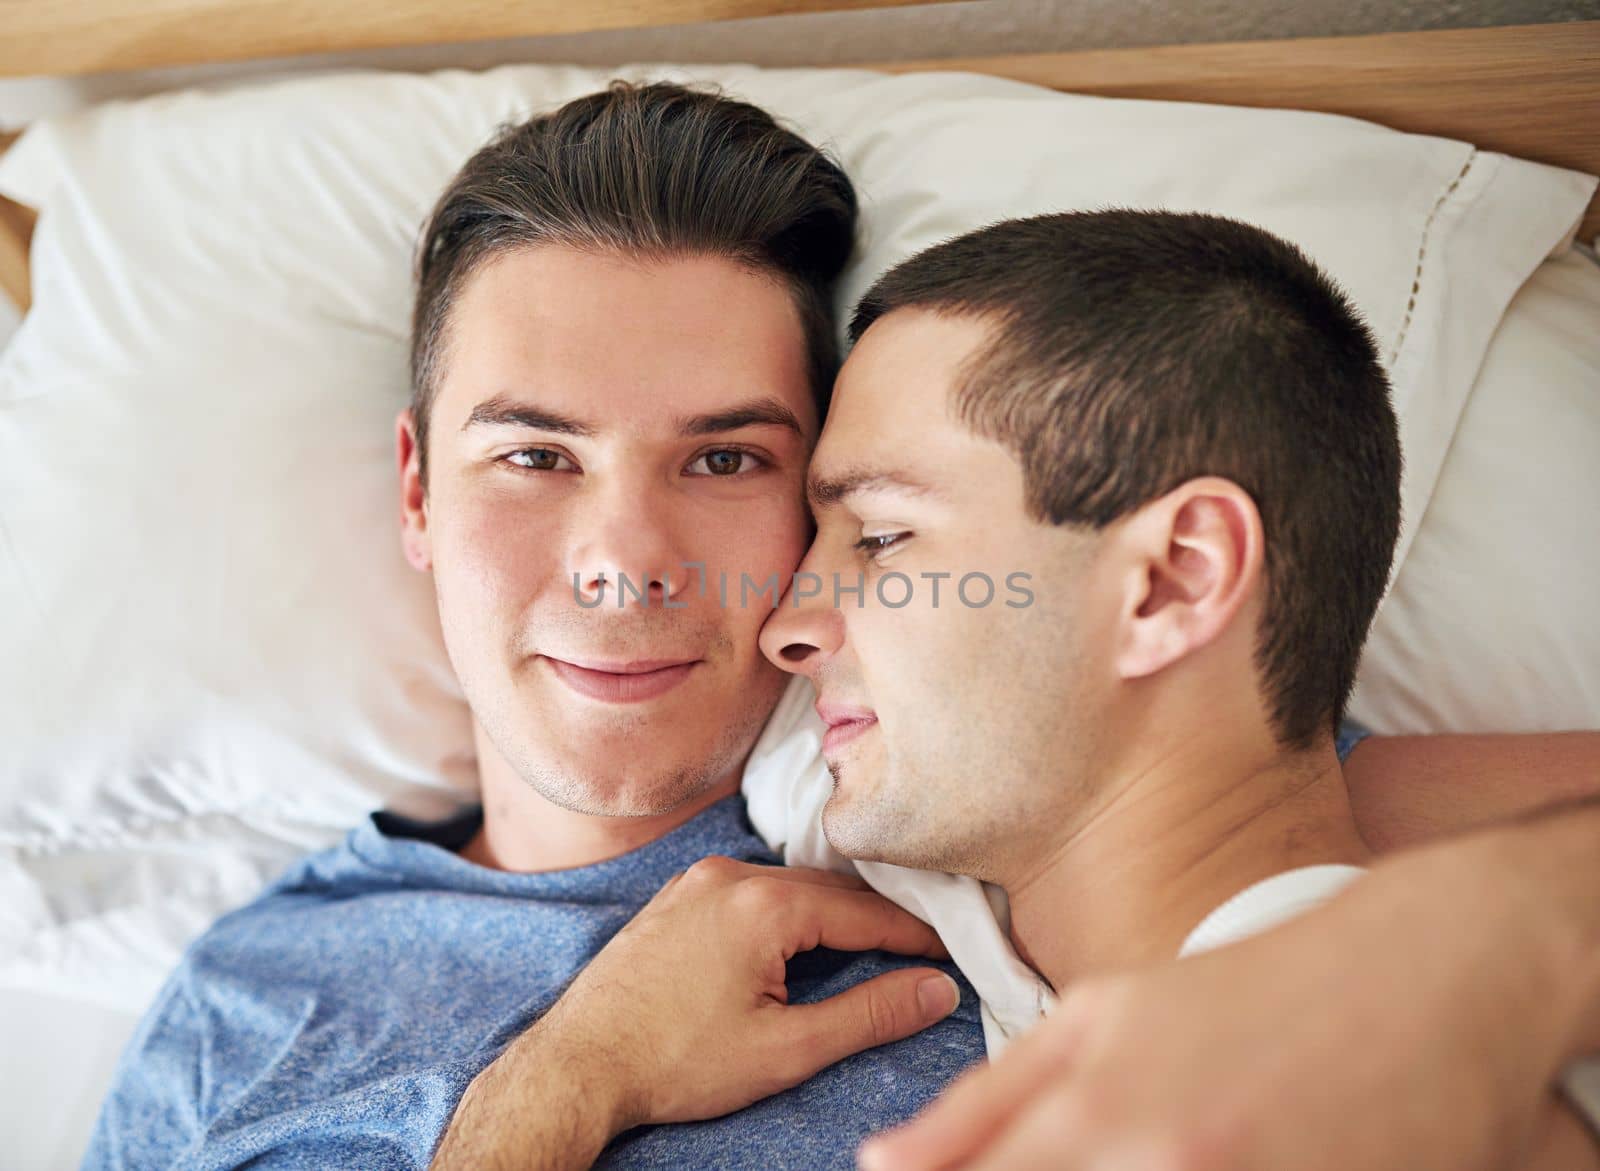 I never want to get up. Portrait of a young gay couple relaxing in bed